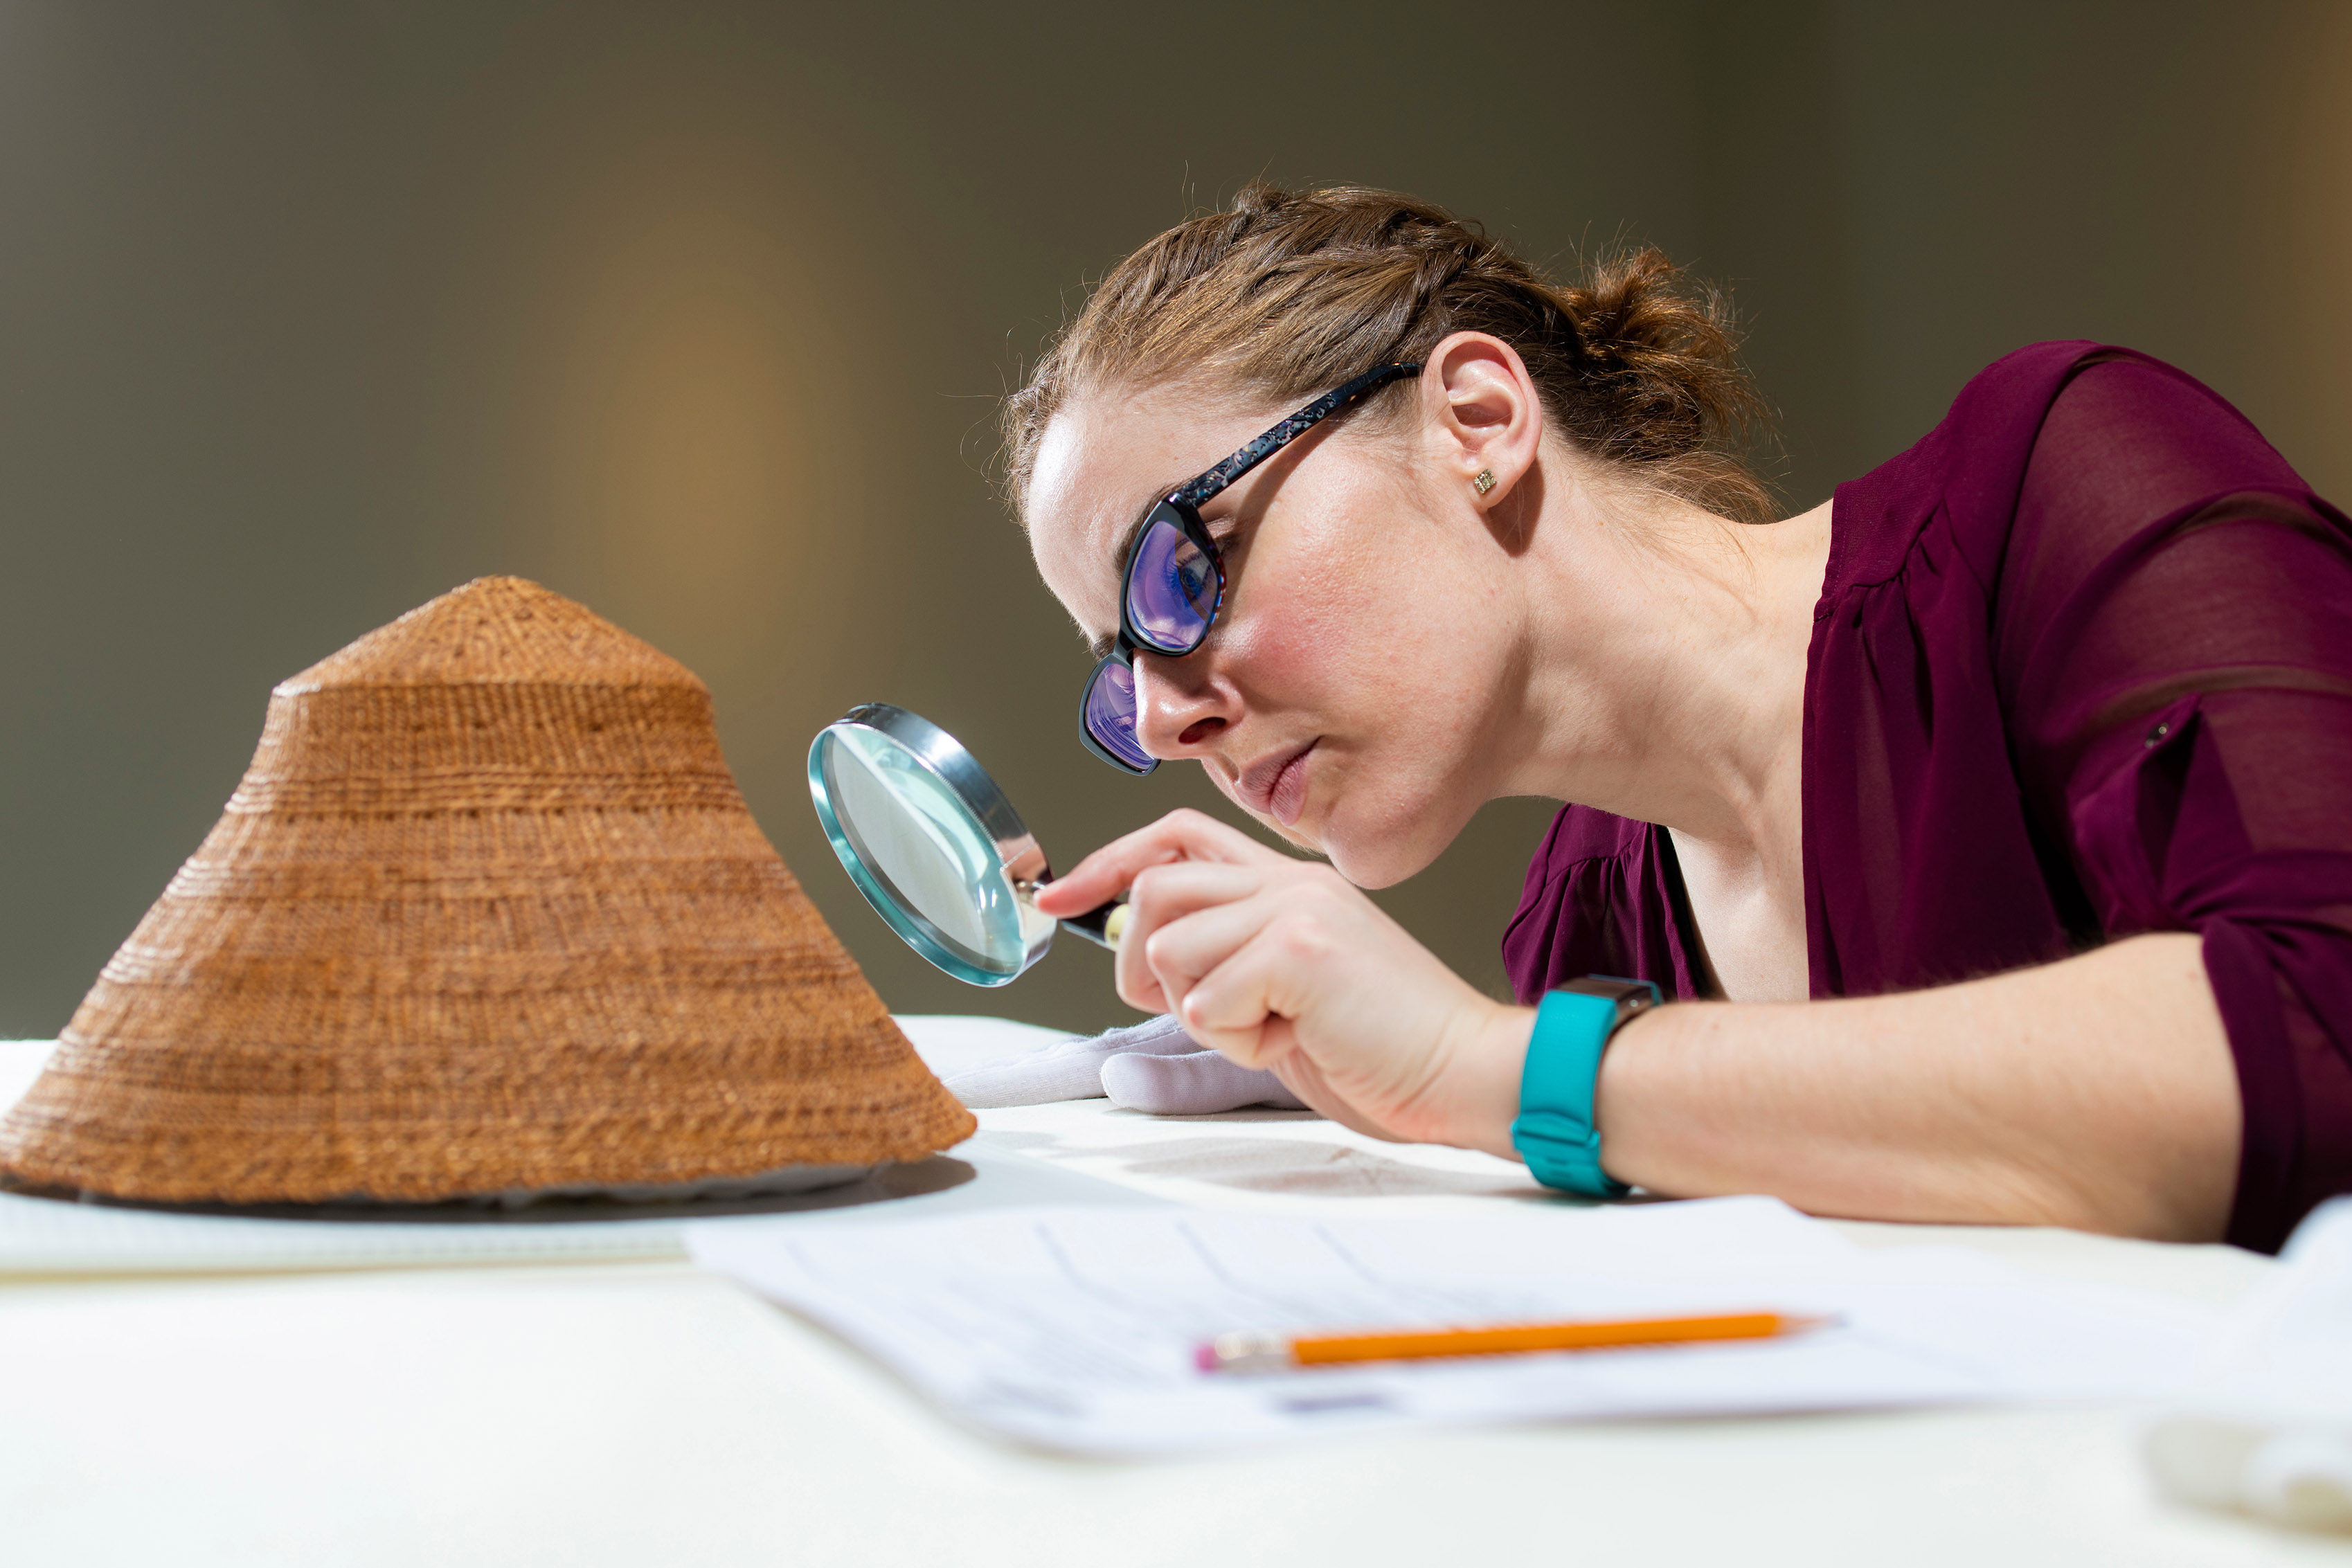 UAlberta Museums staff closely examines a wicker hat with a magnifying glass